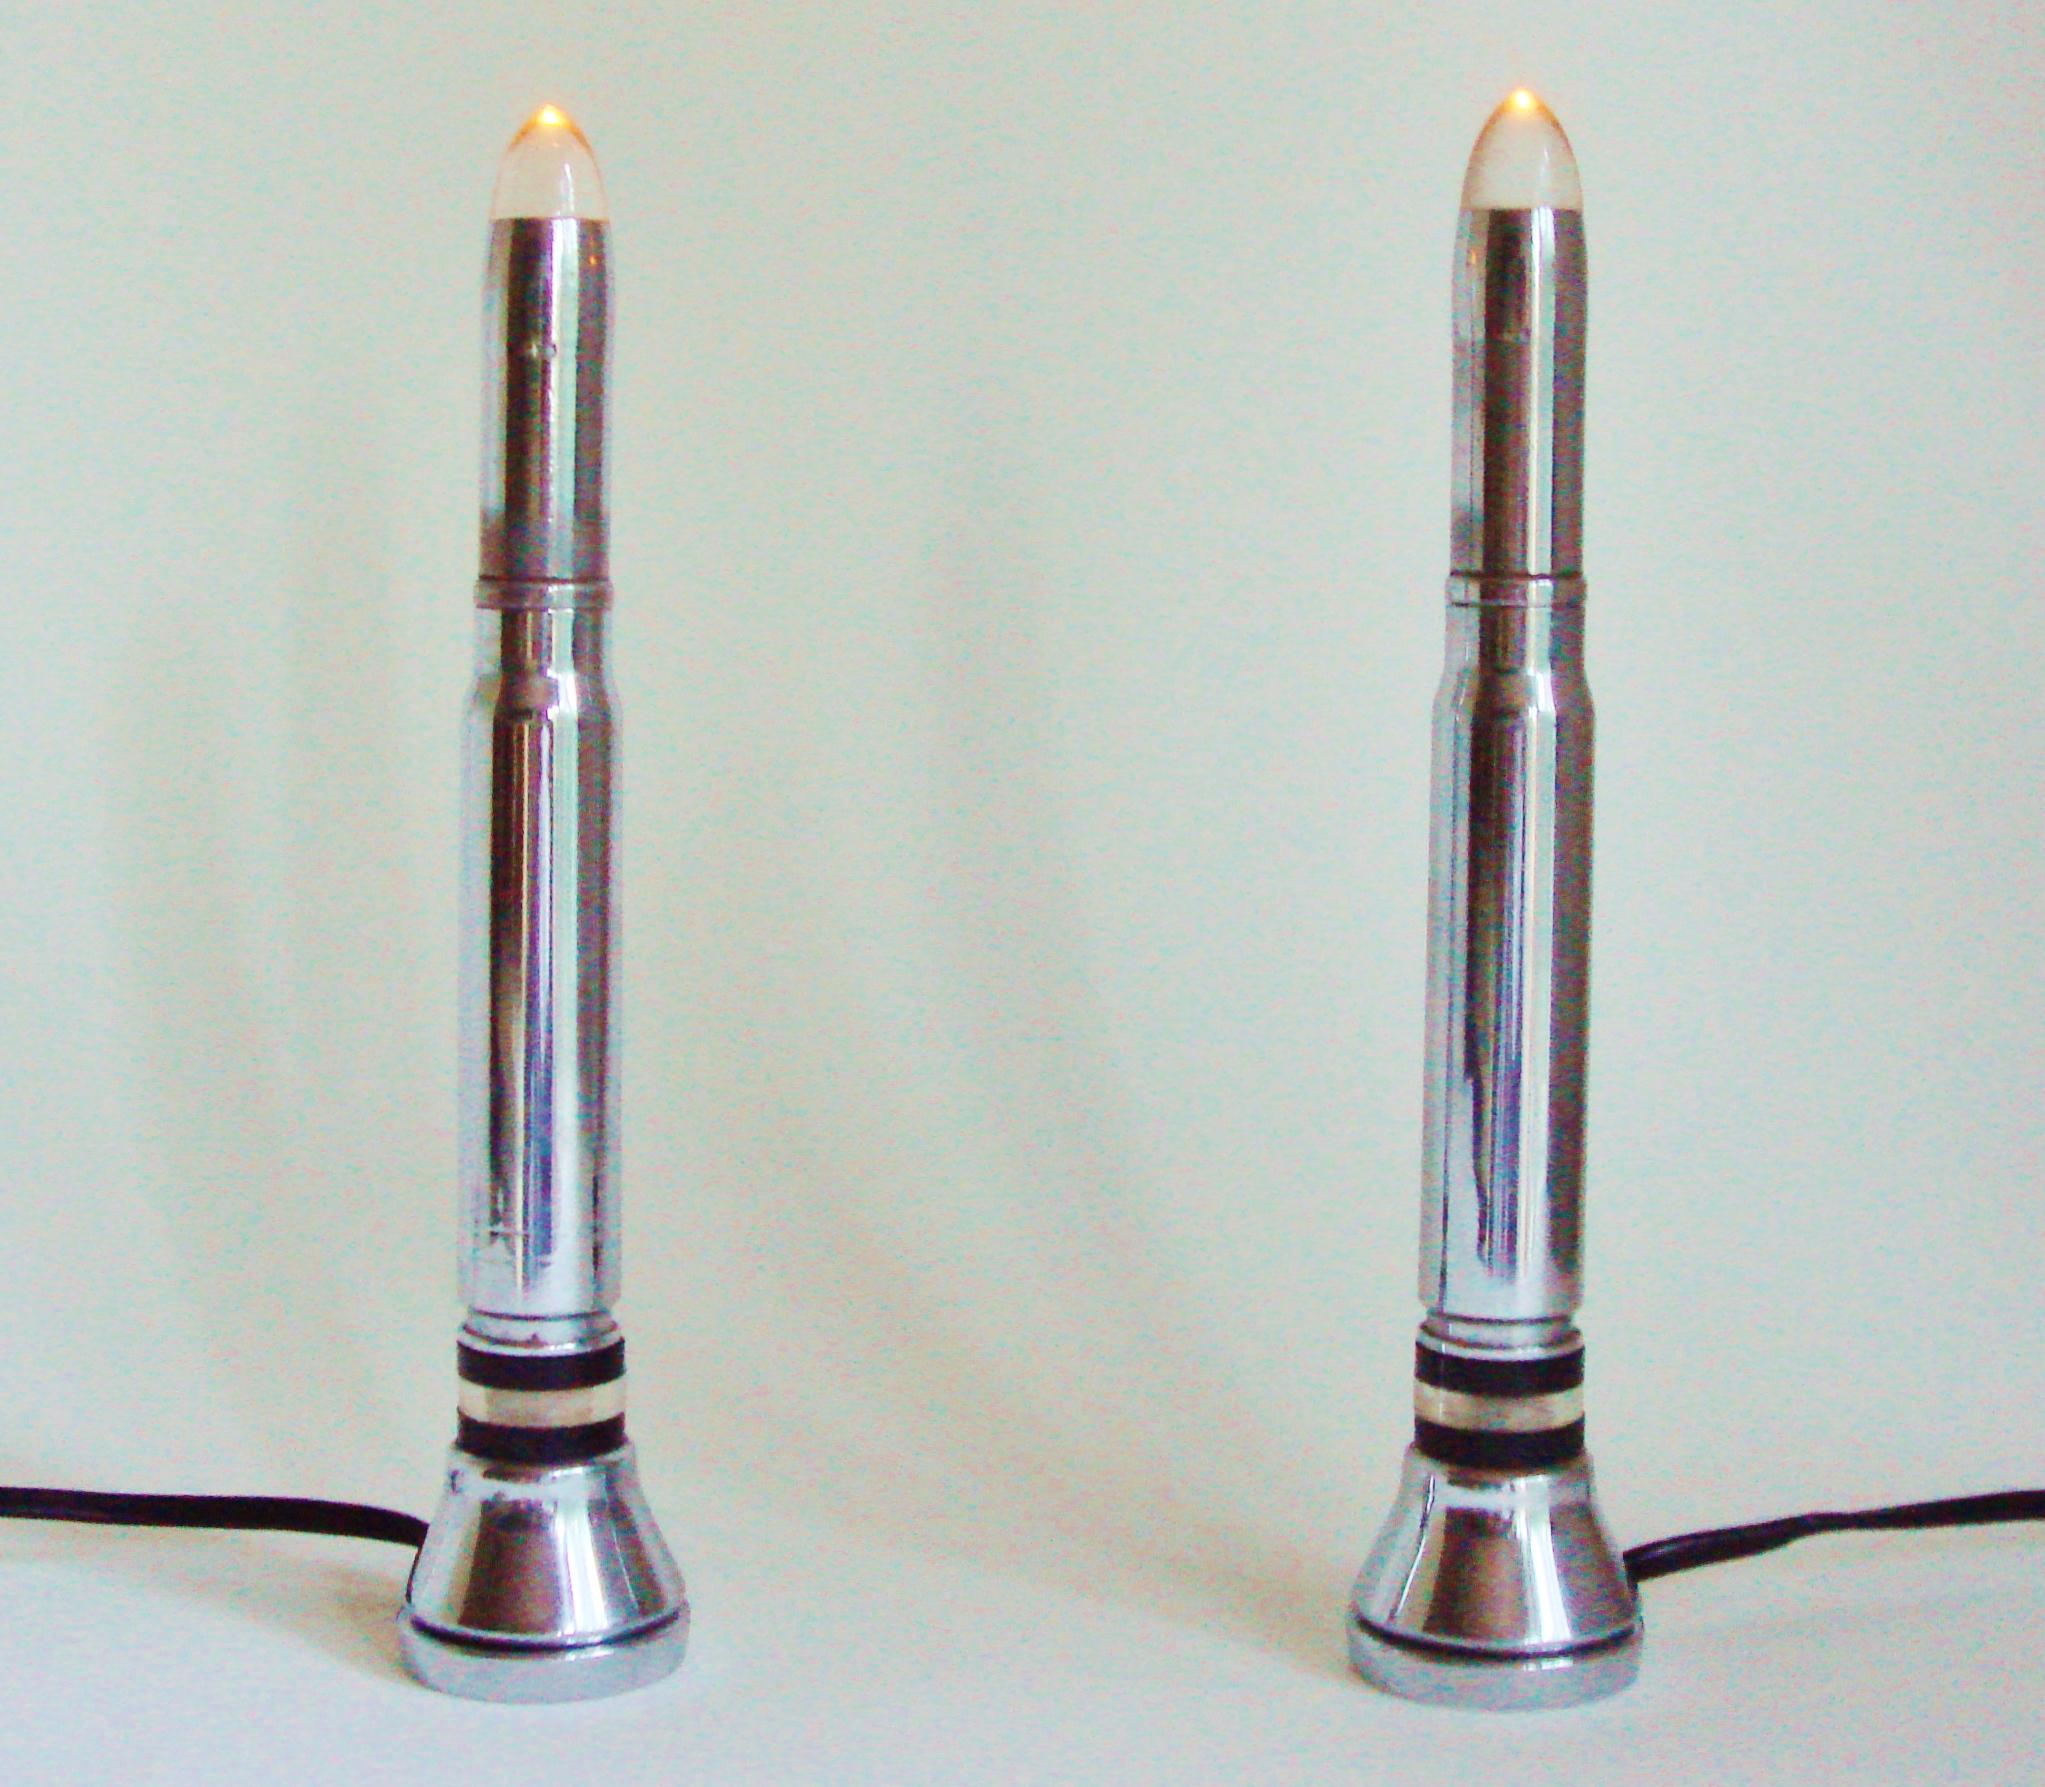 These beautifully designed English Art Deco faux-candle lamps are actually Trench Art pieces created from 20 mm aircraft cannon shells. In 1941 the English Royal Air Force equipped their Spitfire and Hurricane aircraft with 20mm Hispano-Suiza